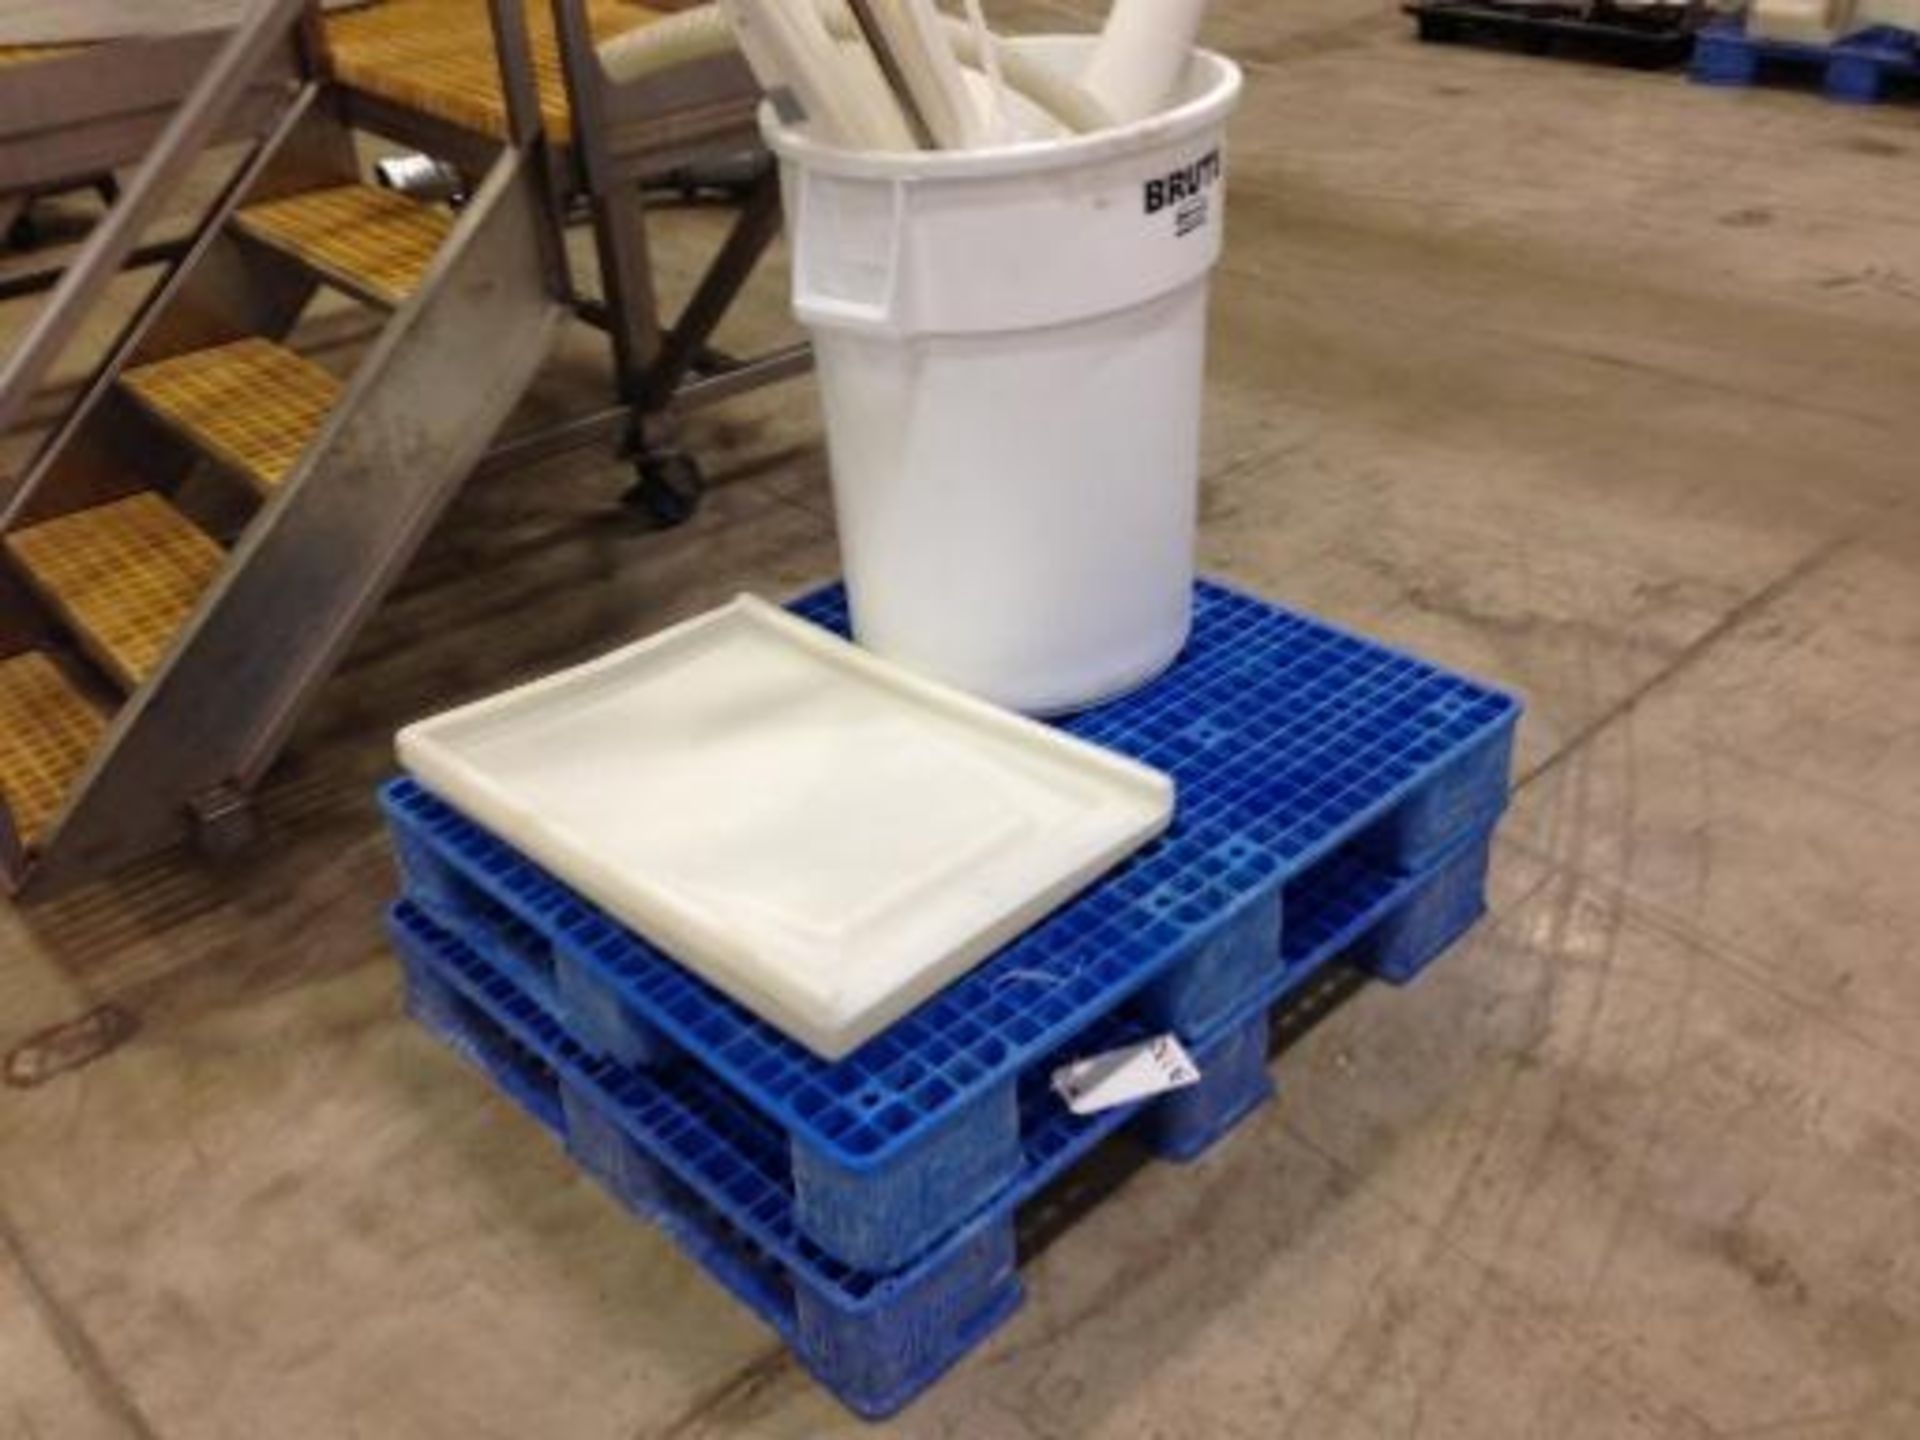 (2) 40 x 48 poly skids and white Brute tub with various nylon parts (LOT) This item located in Grand